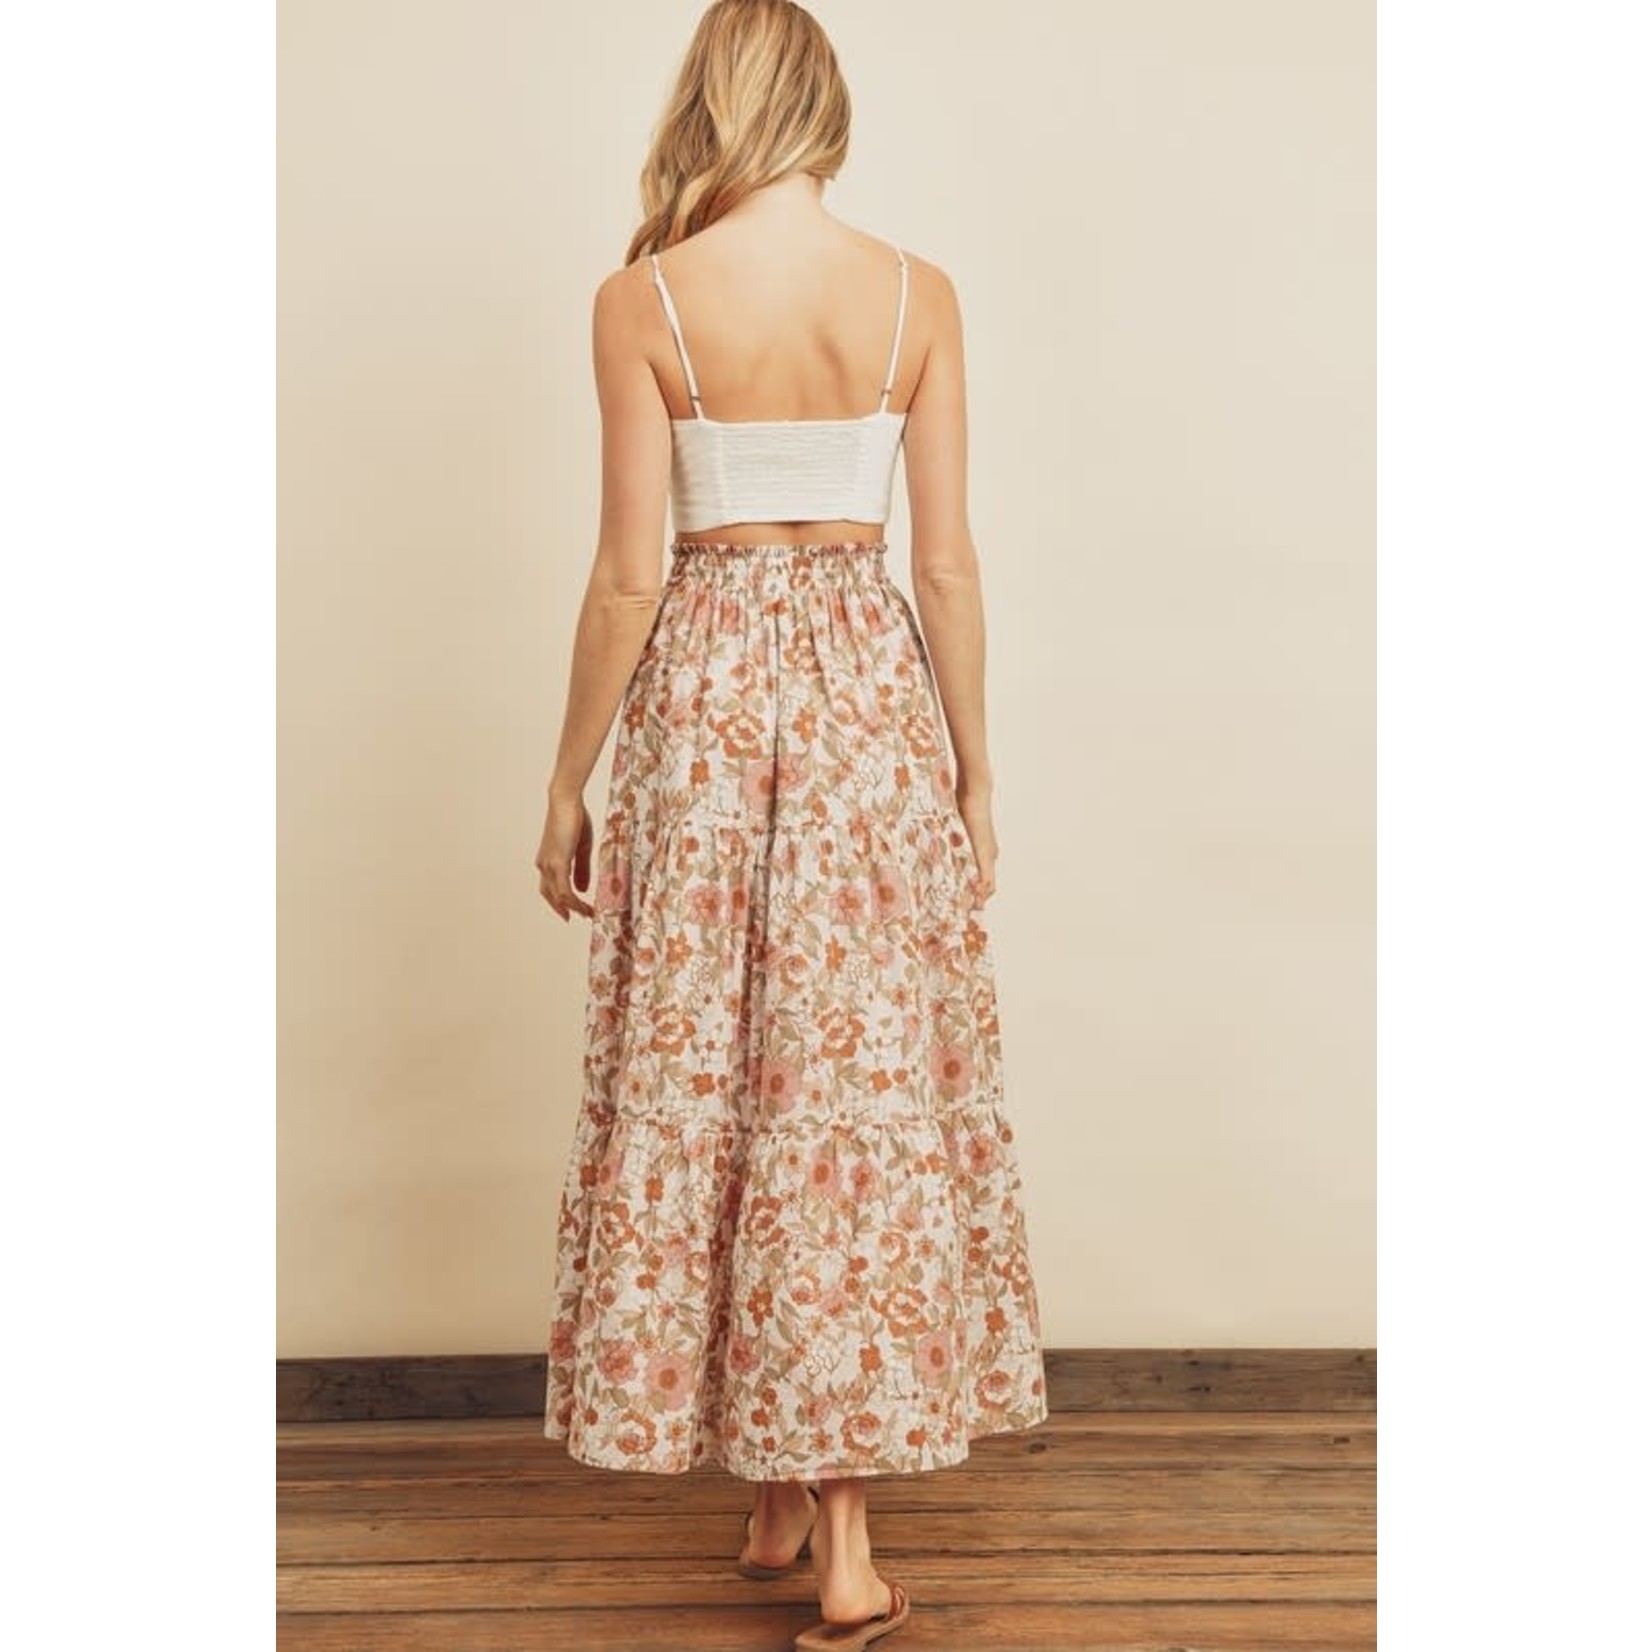 Floral Print Tiered Skirt